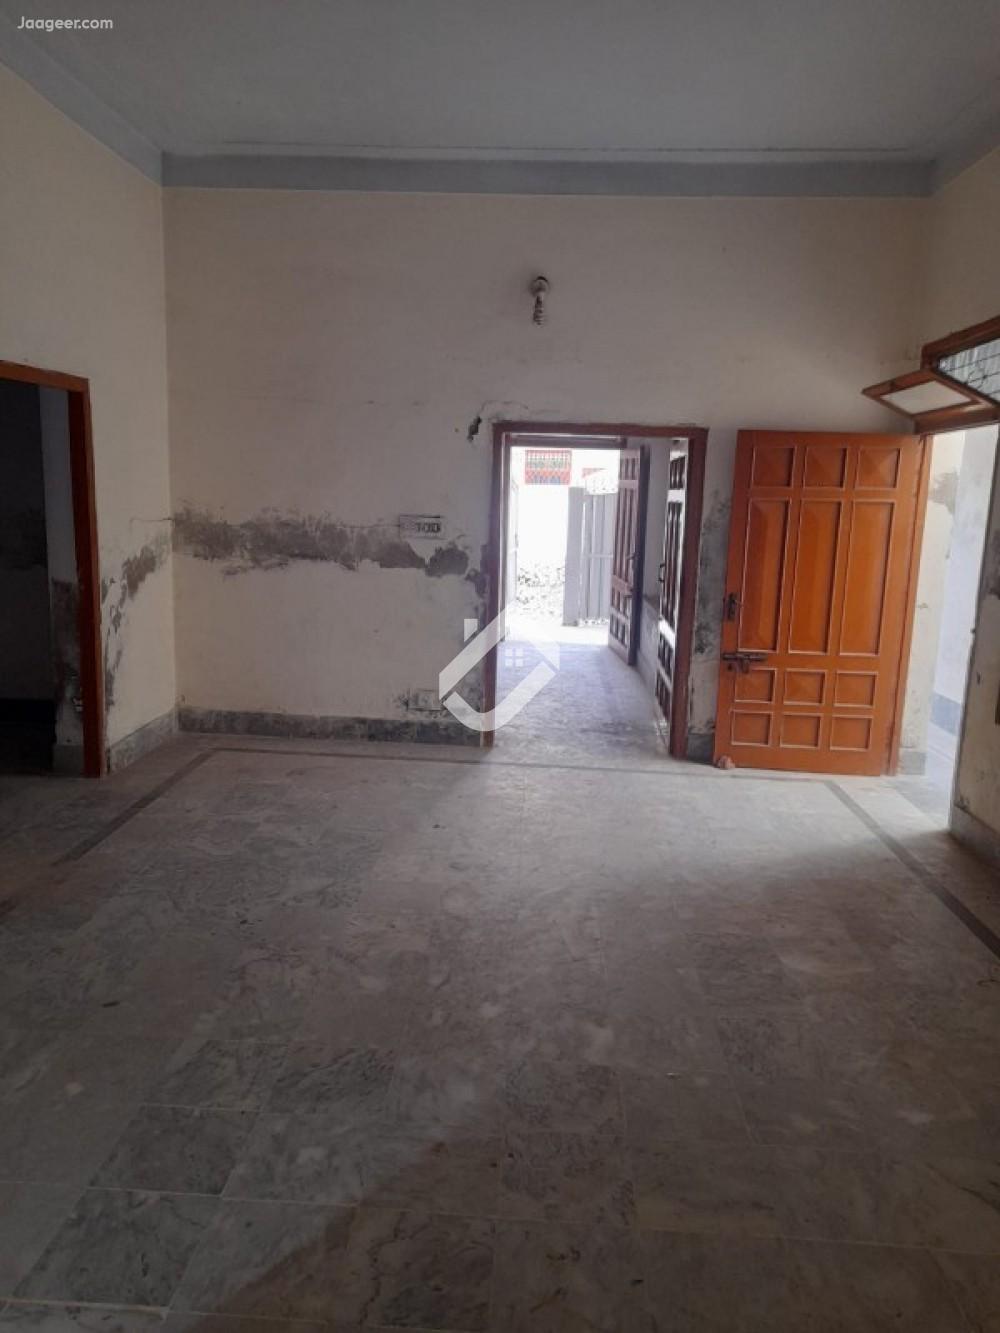 Main image 5 Marla House For Sale In Peer Muhammad Colony Peer Muhammad Colony, Sargodha